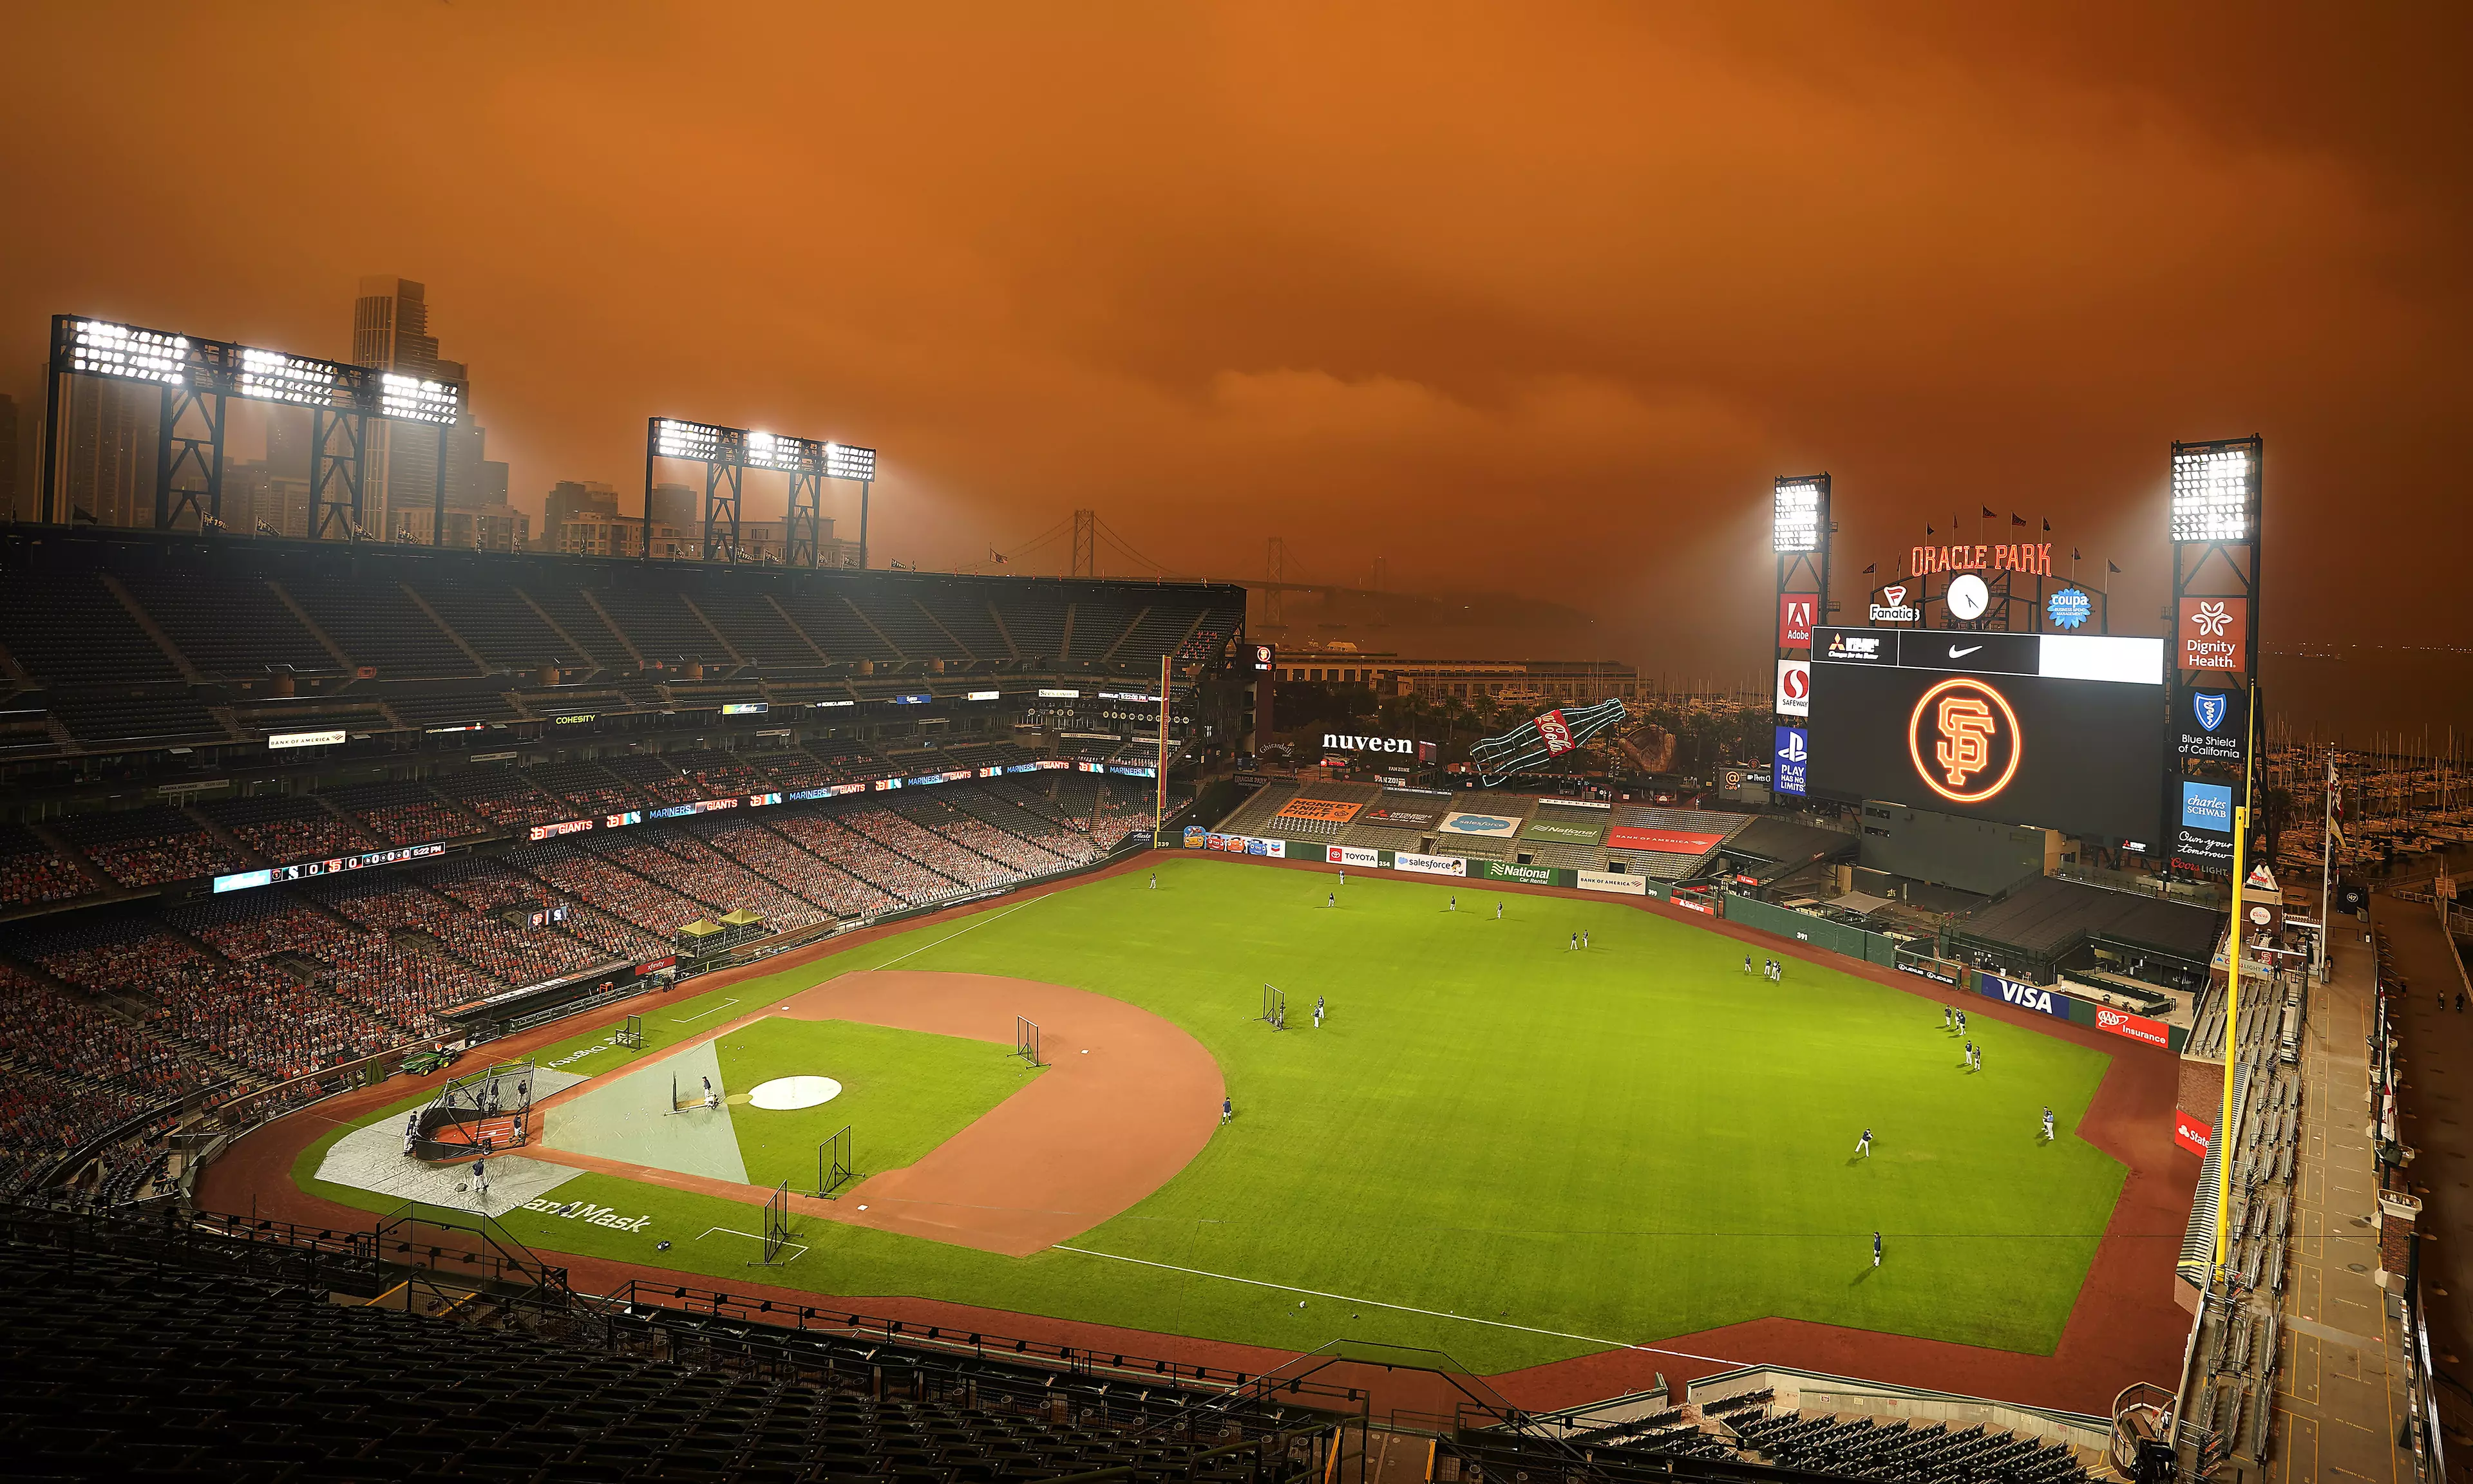 Apocalyptic skies over Oracle Park.